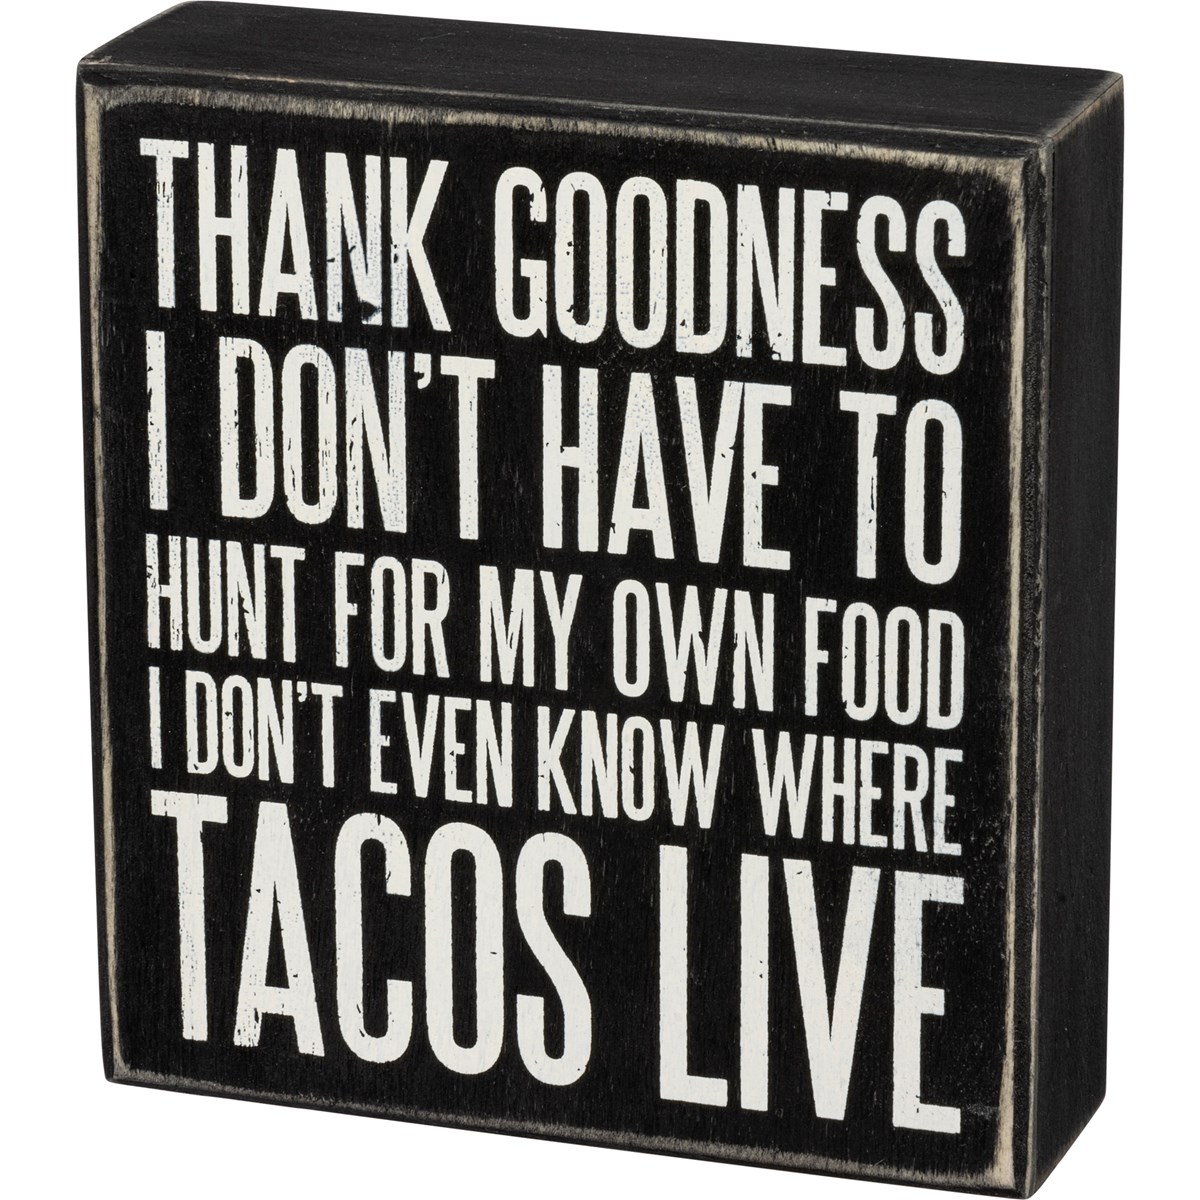 I Don't Even Know Where Tacos Live Box Sign - Wood